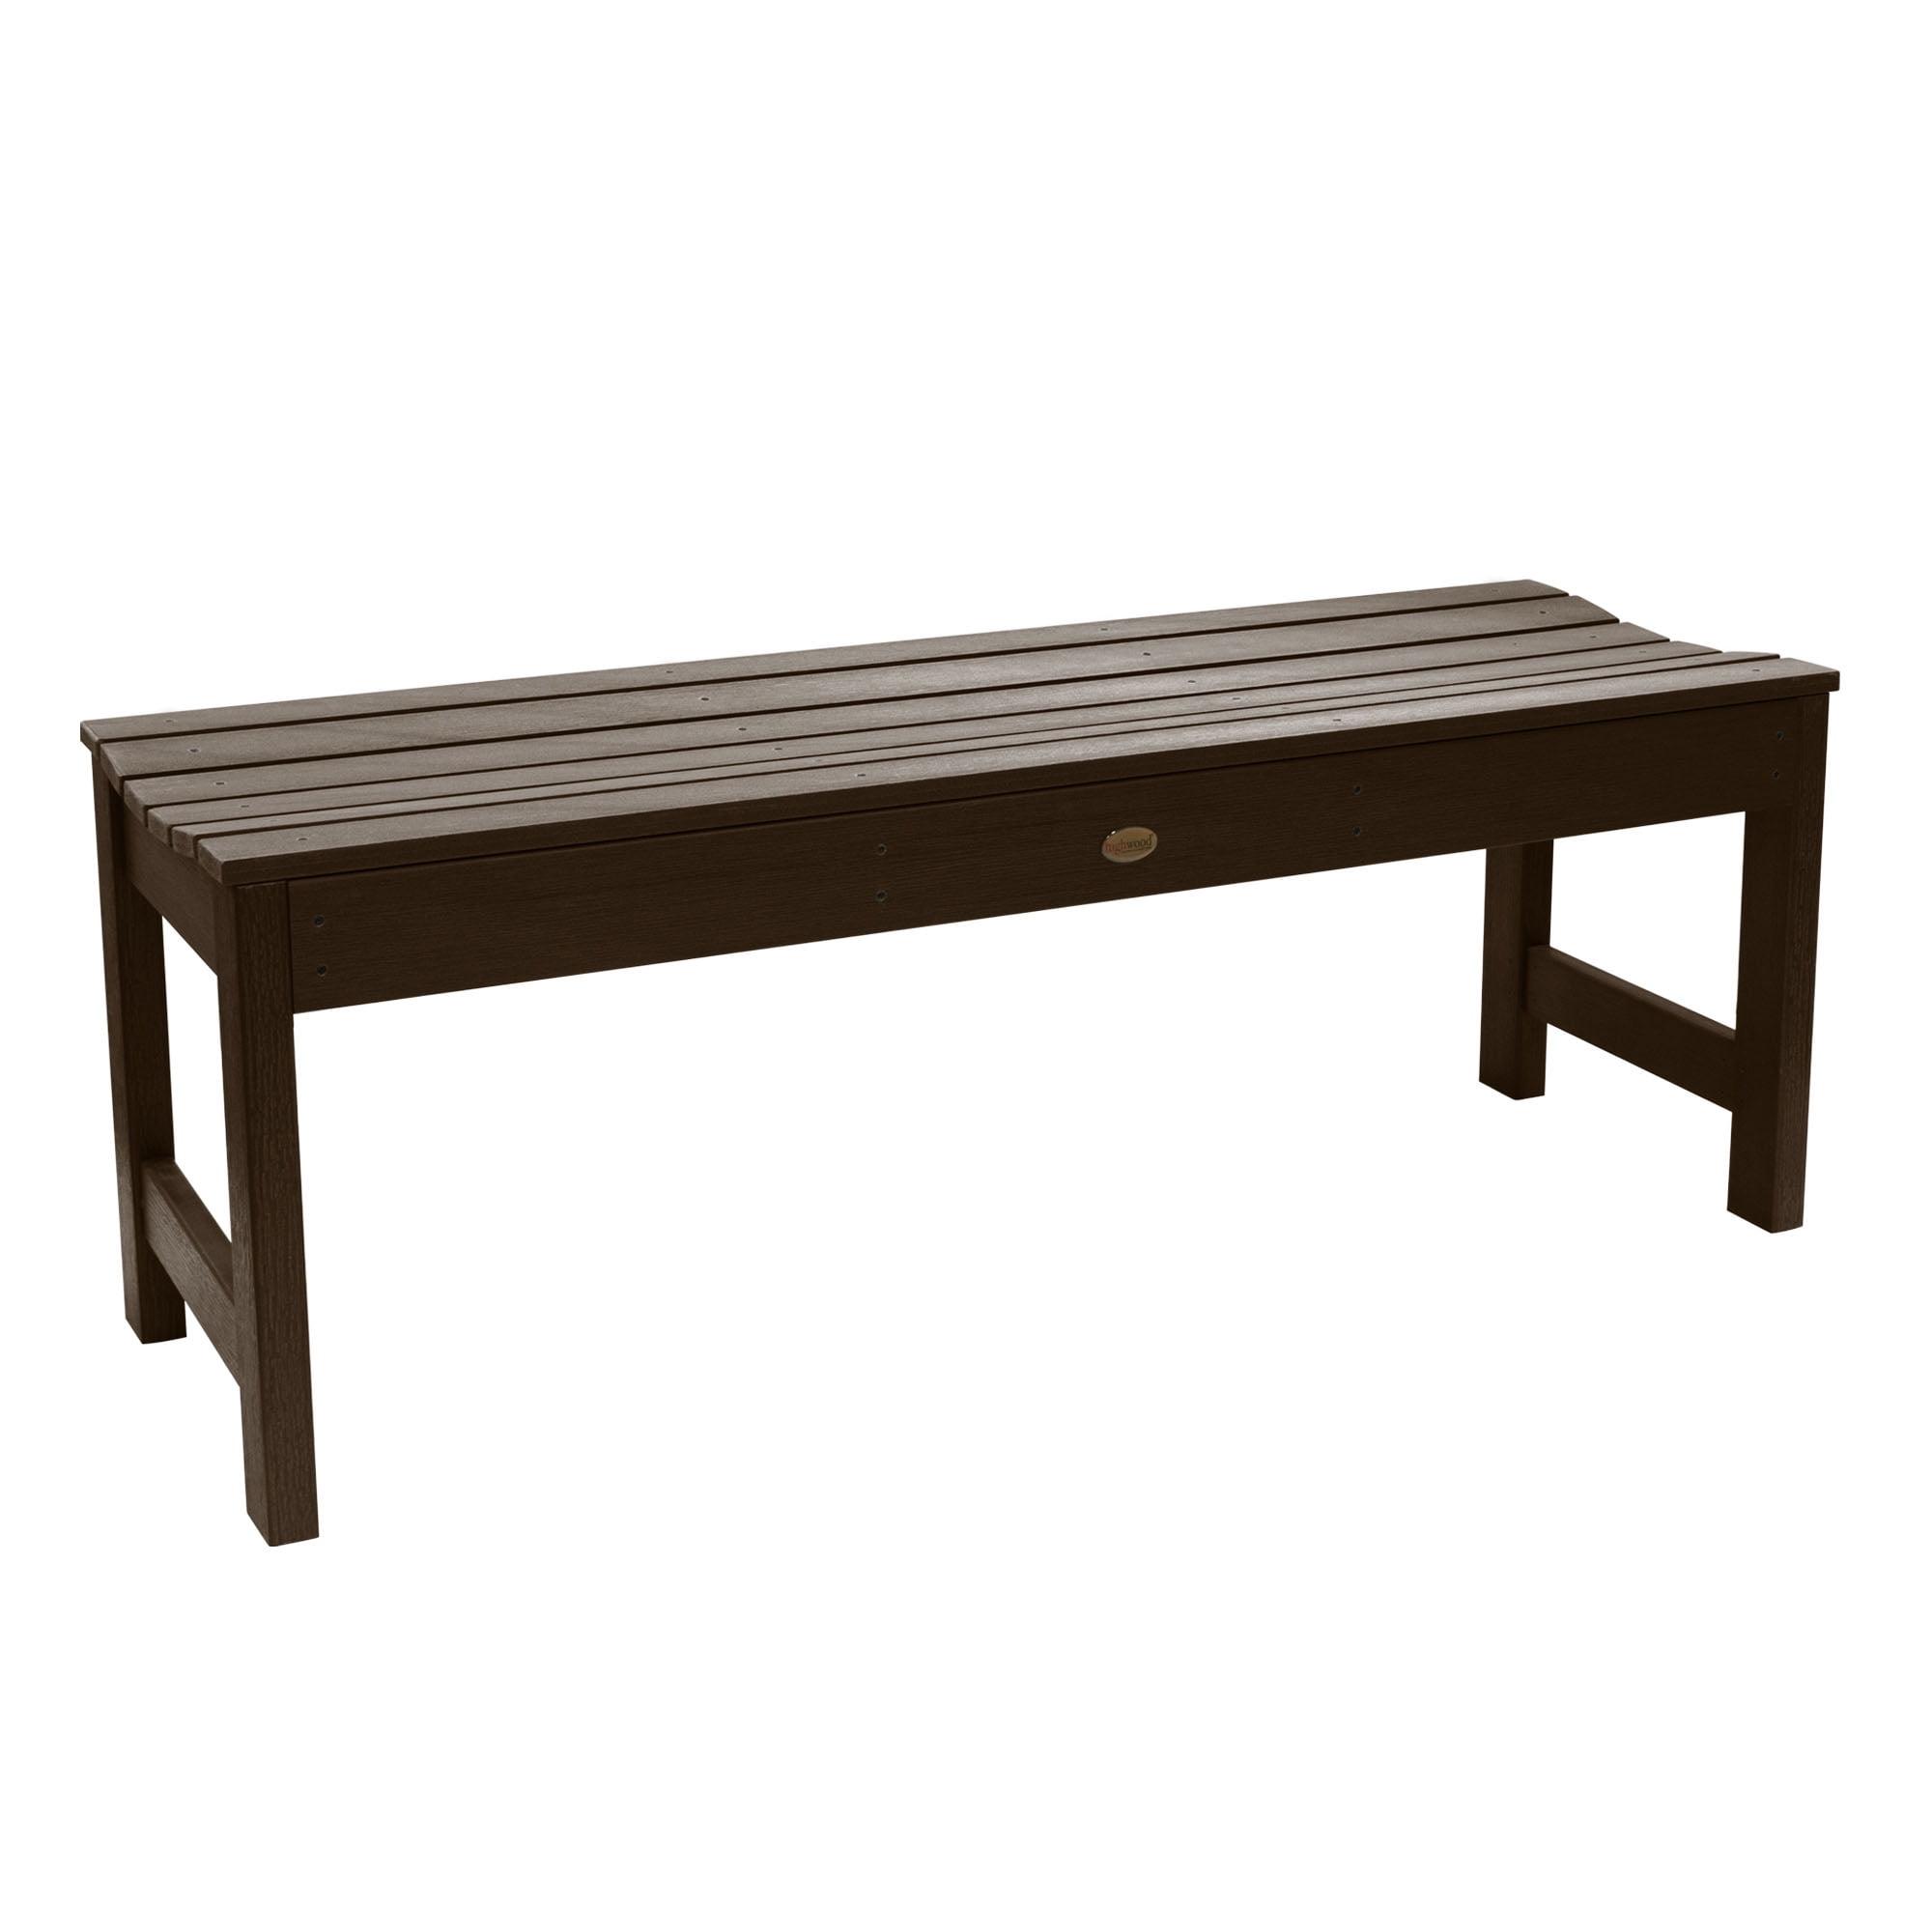 Weathered Acorn 4-Foot Traditional Hand-Crafted Picnic Bench